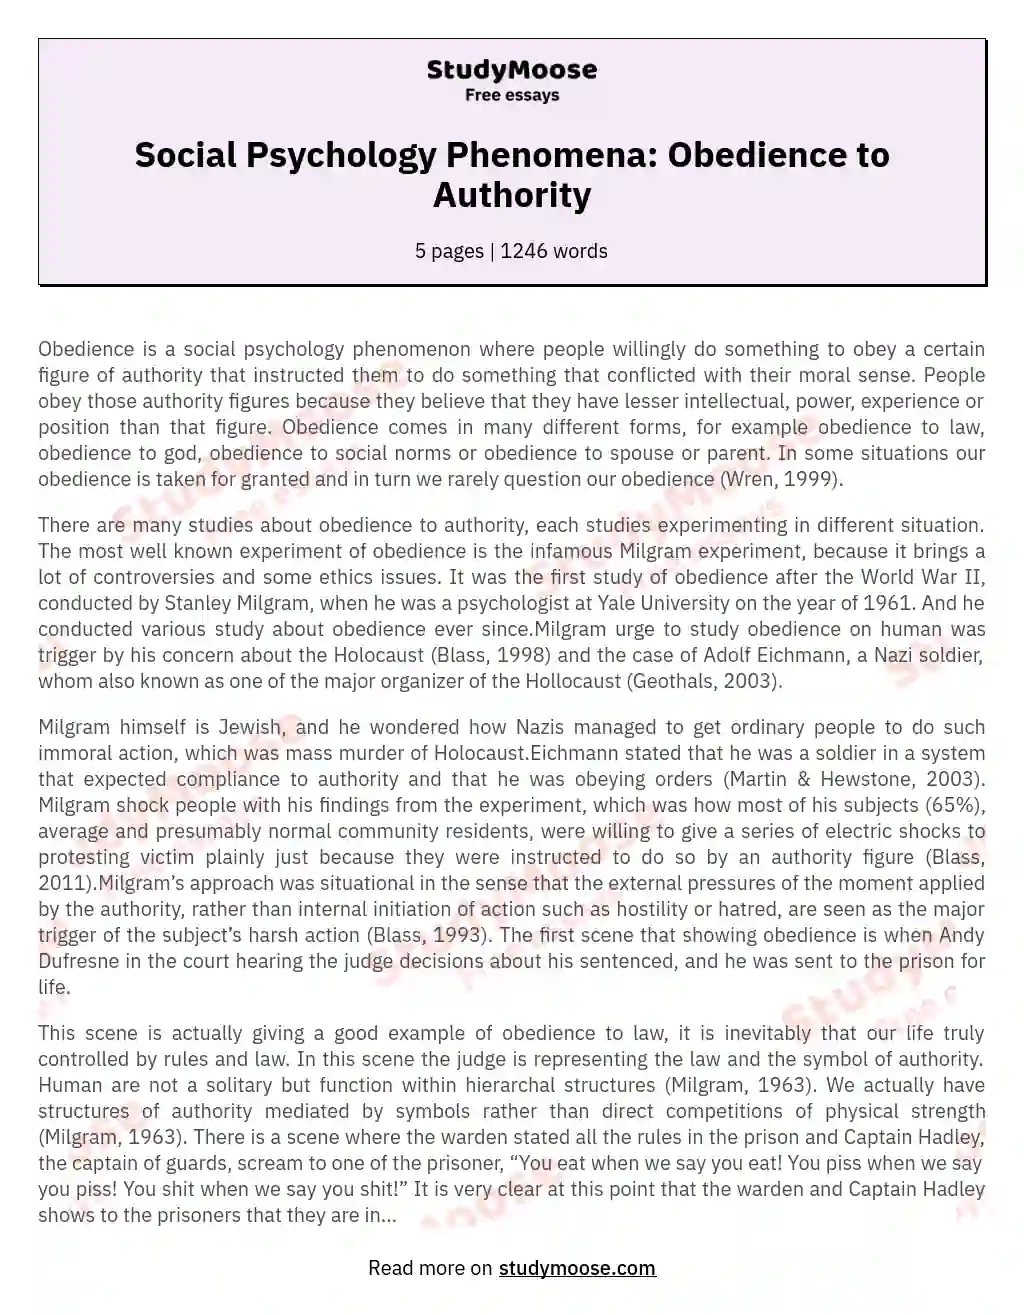 Ethical Dimensions of Obedience in Human Behavior essay